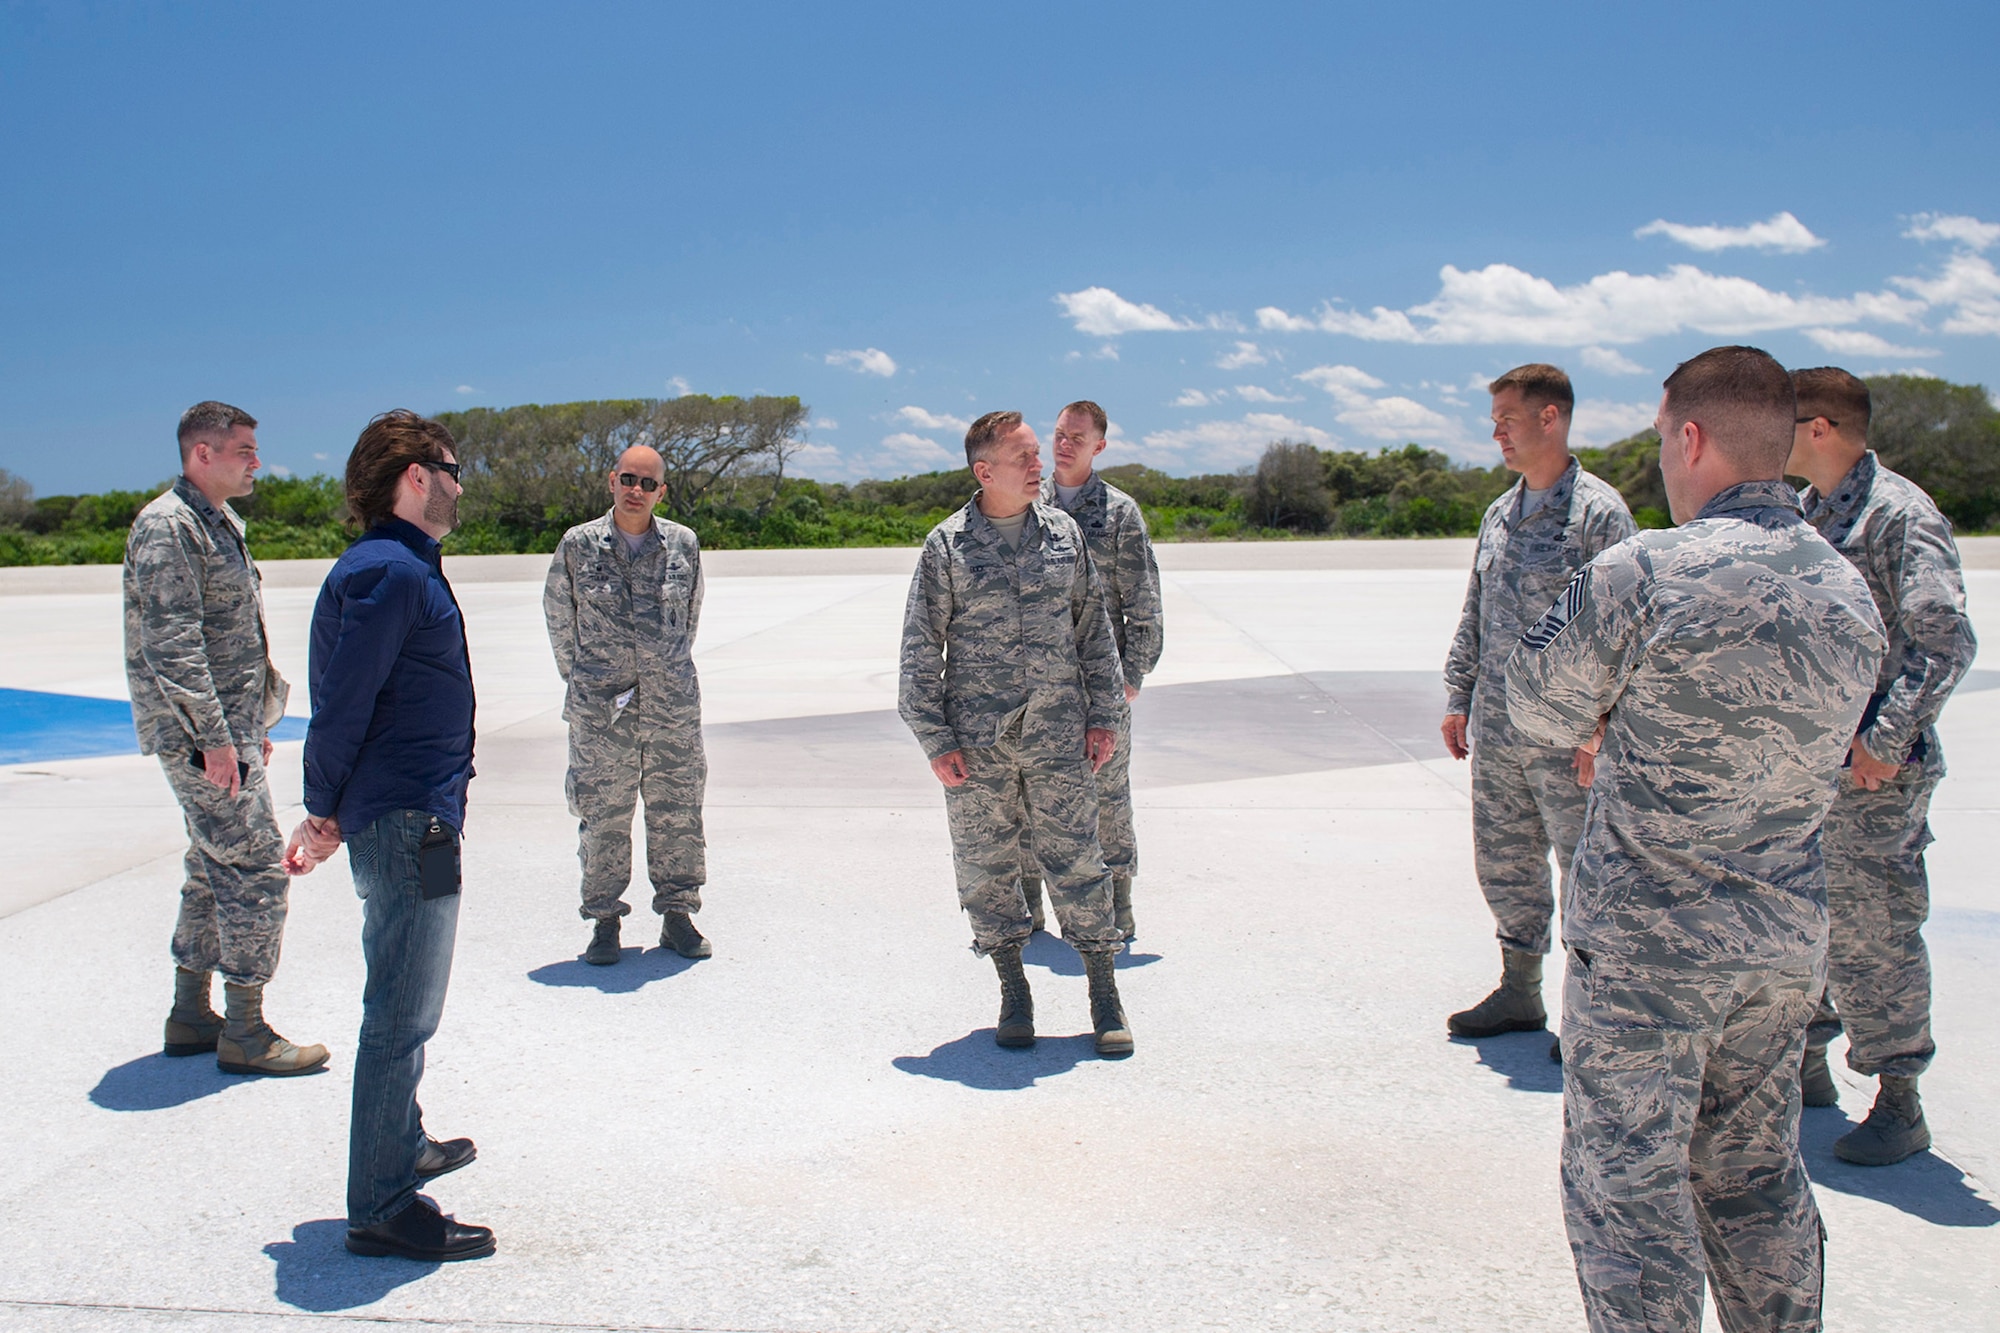 Lt. Gen. David J. Buck, commander, 14th Air Force (Air Forces Strategic), Air Force Space Command; and commander, Joint Functional Component Command for Space, U.S. Strategic Command, looks around SpaceX’s landing zone 1 during a tour of Cape Canaveral Air Force Station May 5, 2016. Buck and Chief Master Sgt. Craig Neri, 14th AF command chief and command senior enlisted leader for JFCC Space, visited Patrick Air Force Base and Cape Canaveral Air Force Station May 4 and 5 and gained insight into the contributions Airmen across the wing make to keep the 45th Space Wing the World's Premier Gateway to Space. (U.S. Air Force photo by Matthew Jurgens/Released)